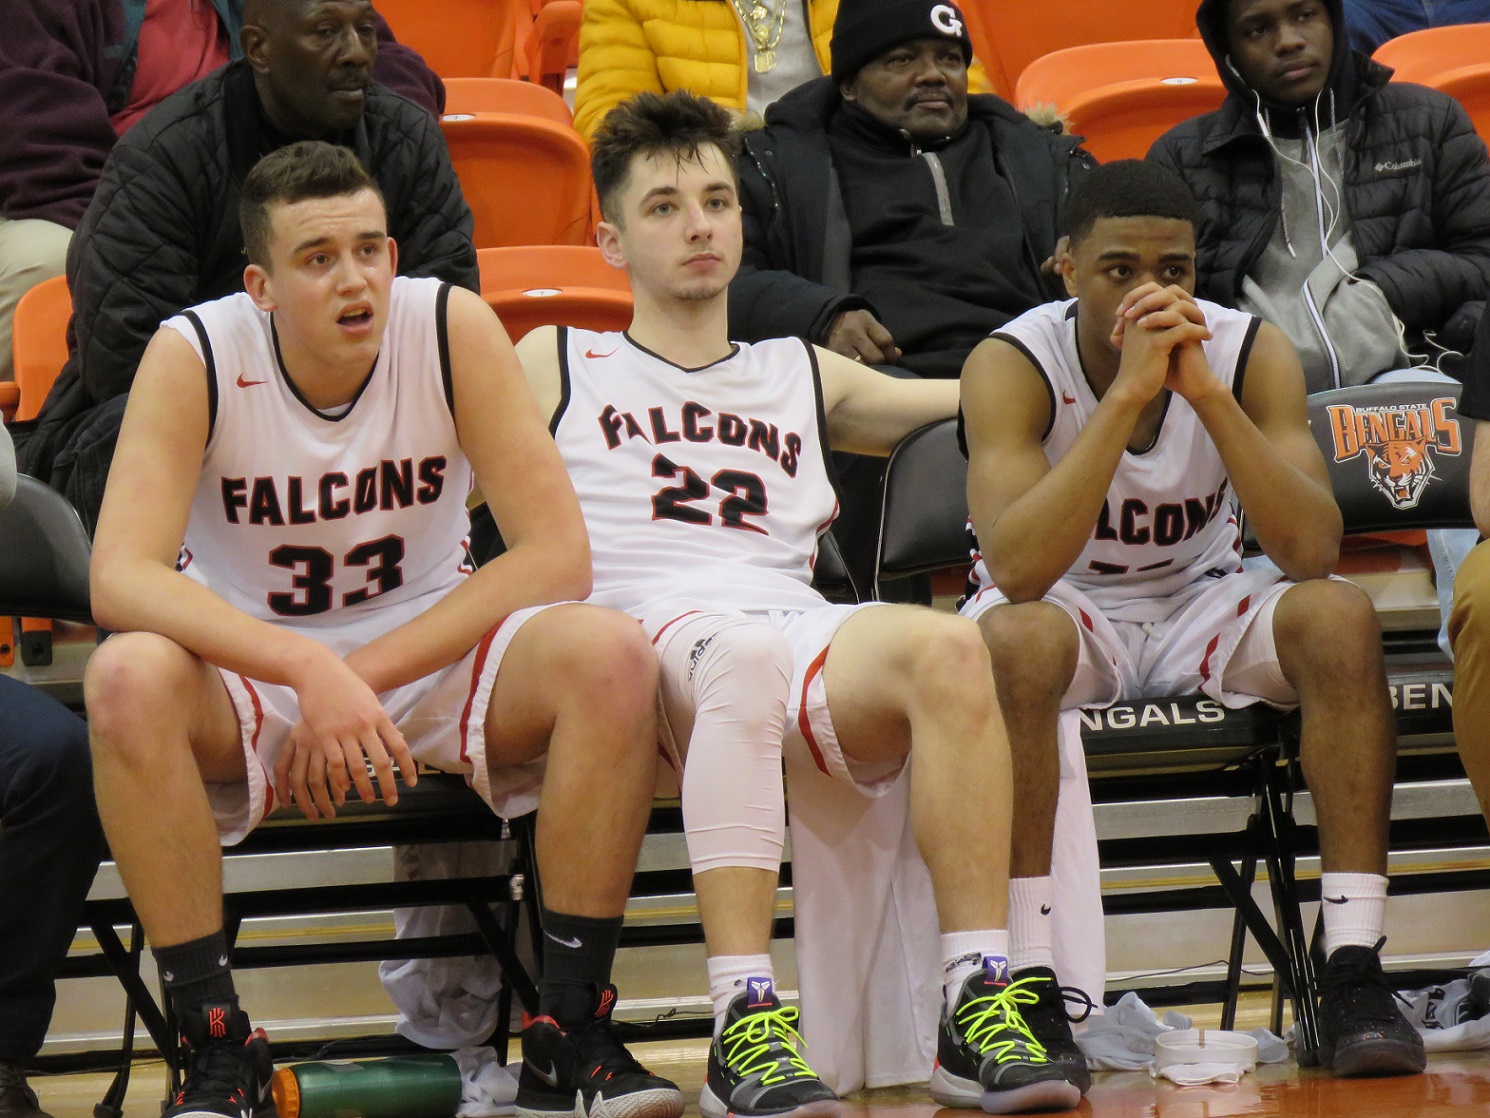 From left, seniors Cam Miller, Roman Wright and Davon Ware watch as time ticks down during the Niagara-Wheatfield Falcons' 66-43 loss in the Section VI Class A1 semifinals. (Photos by David Yarger)